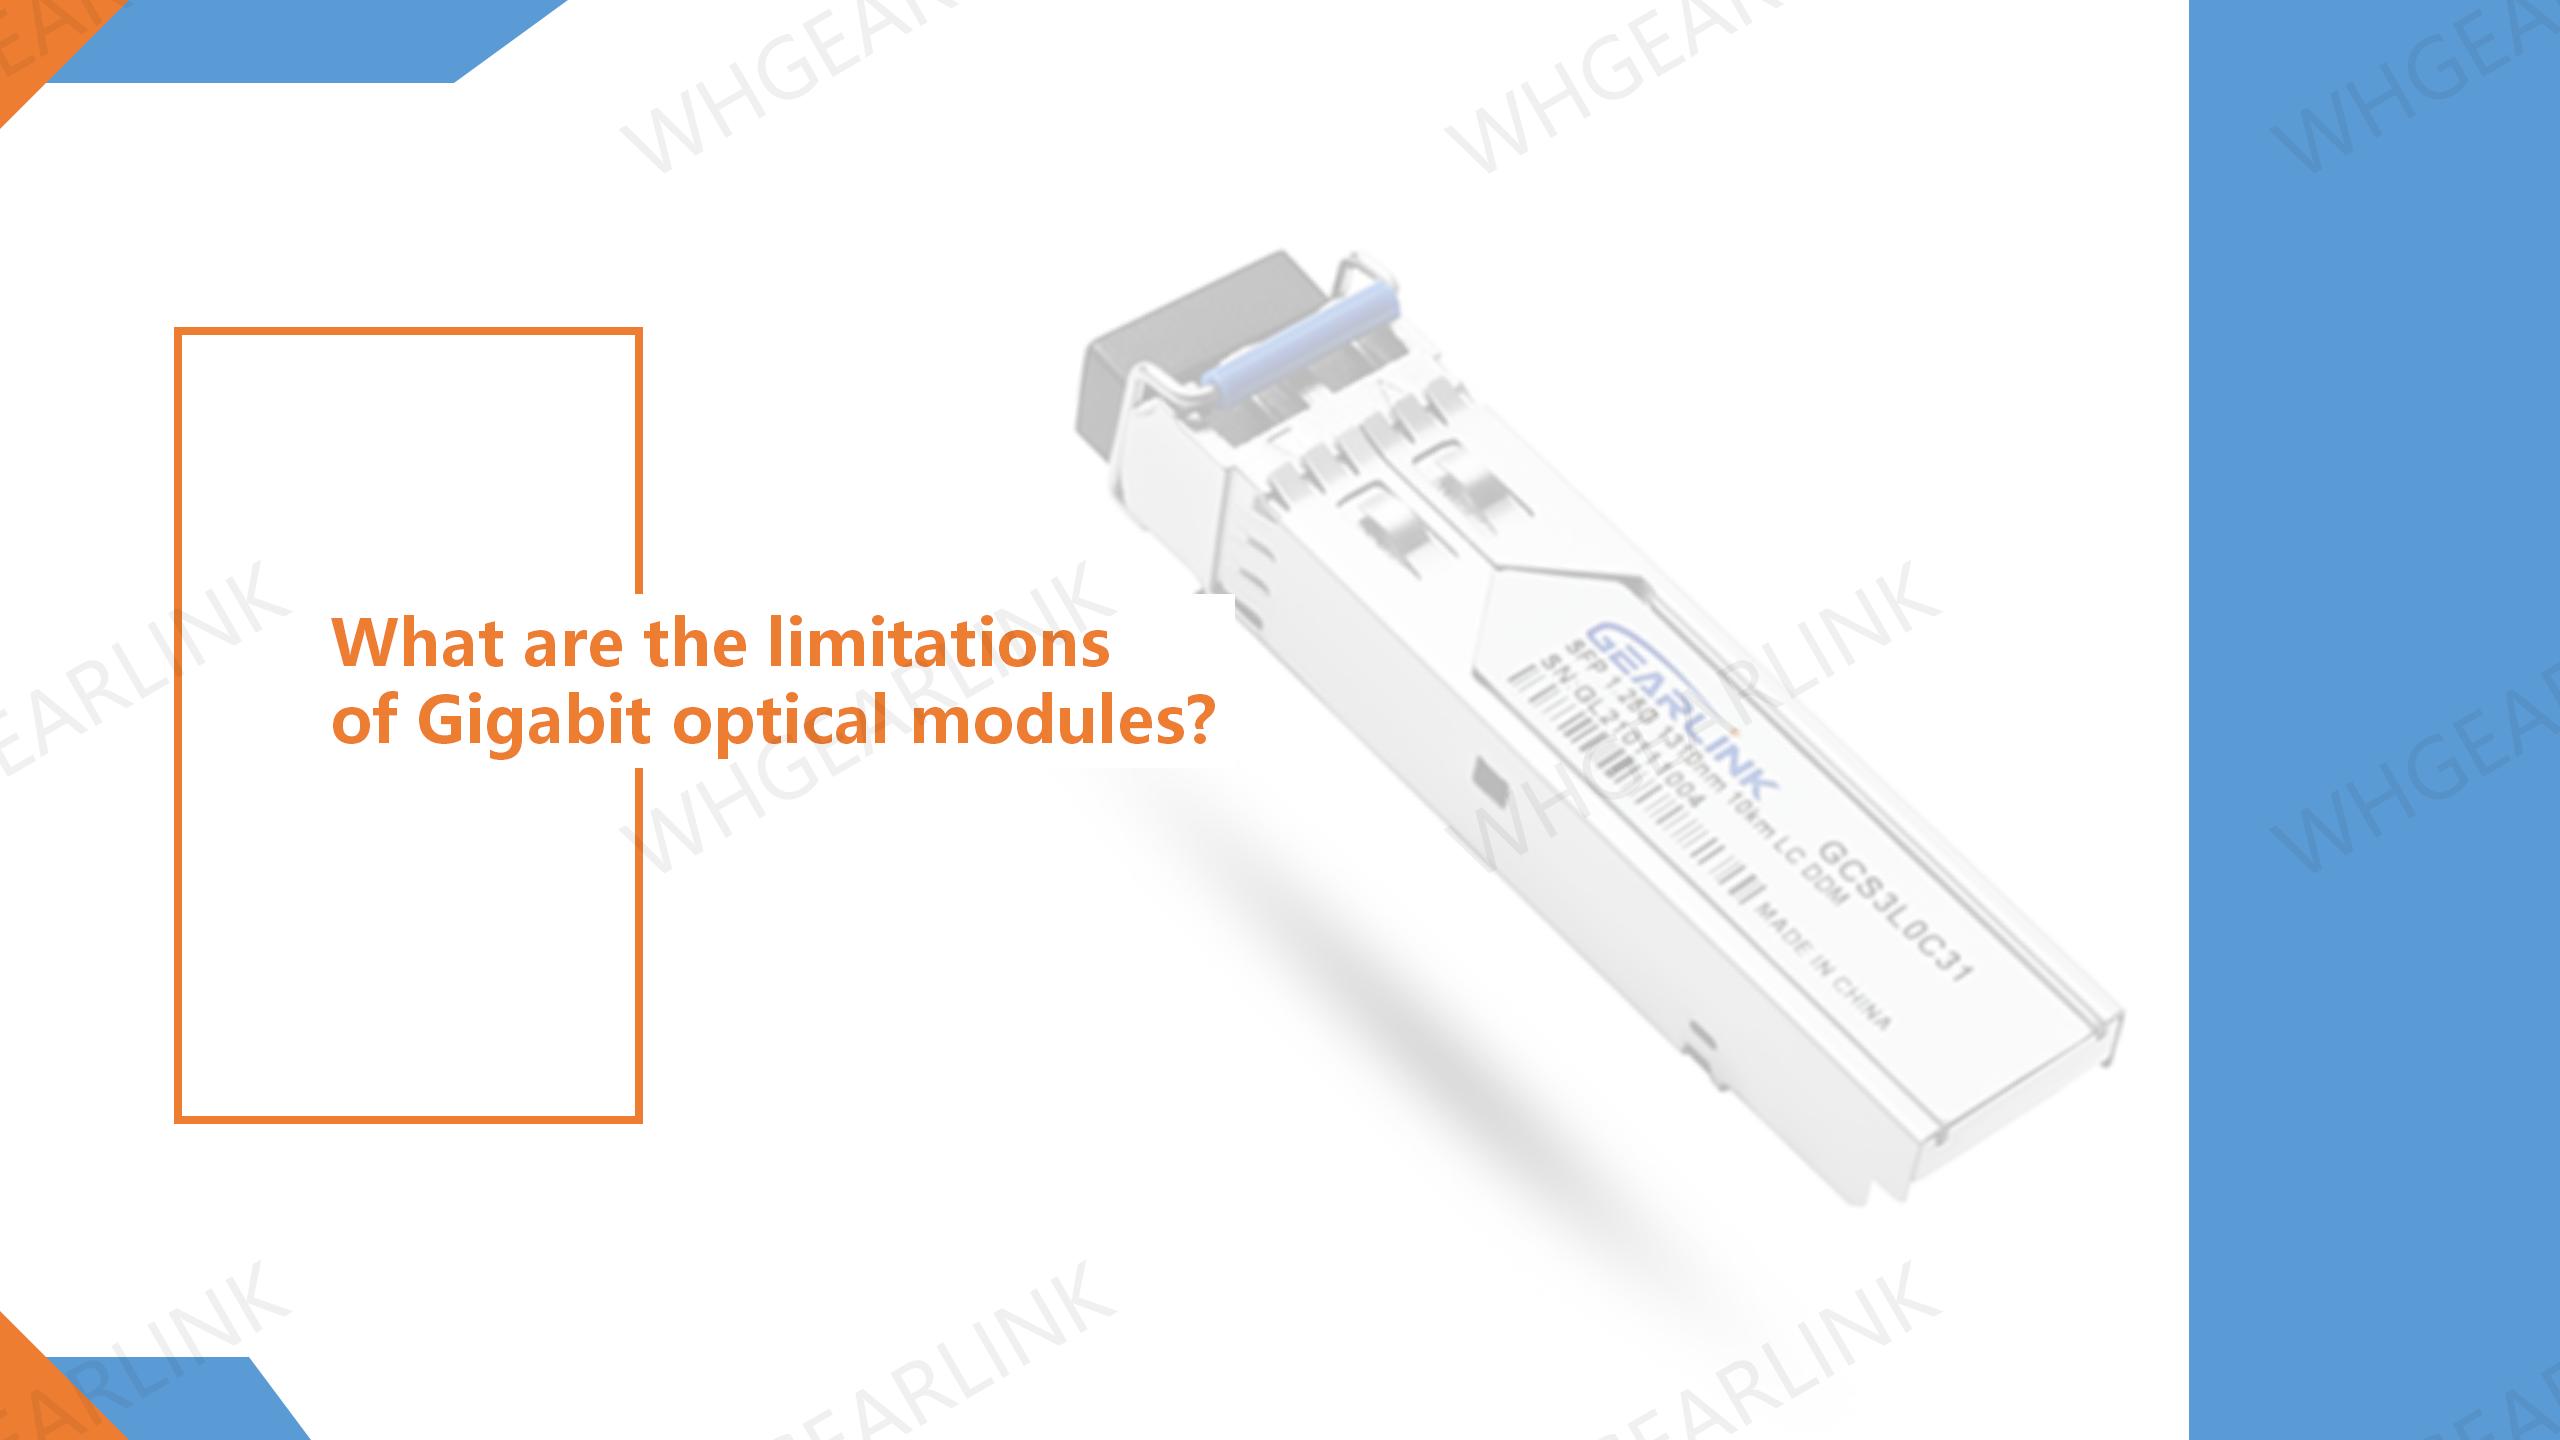 What are the limitations of Gigabit optical modules?